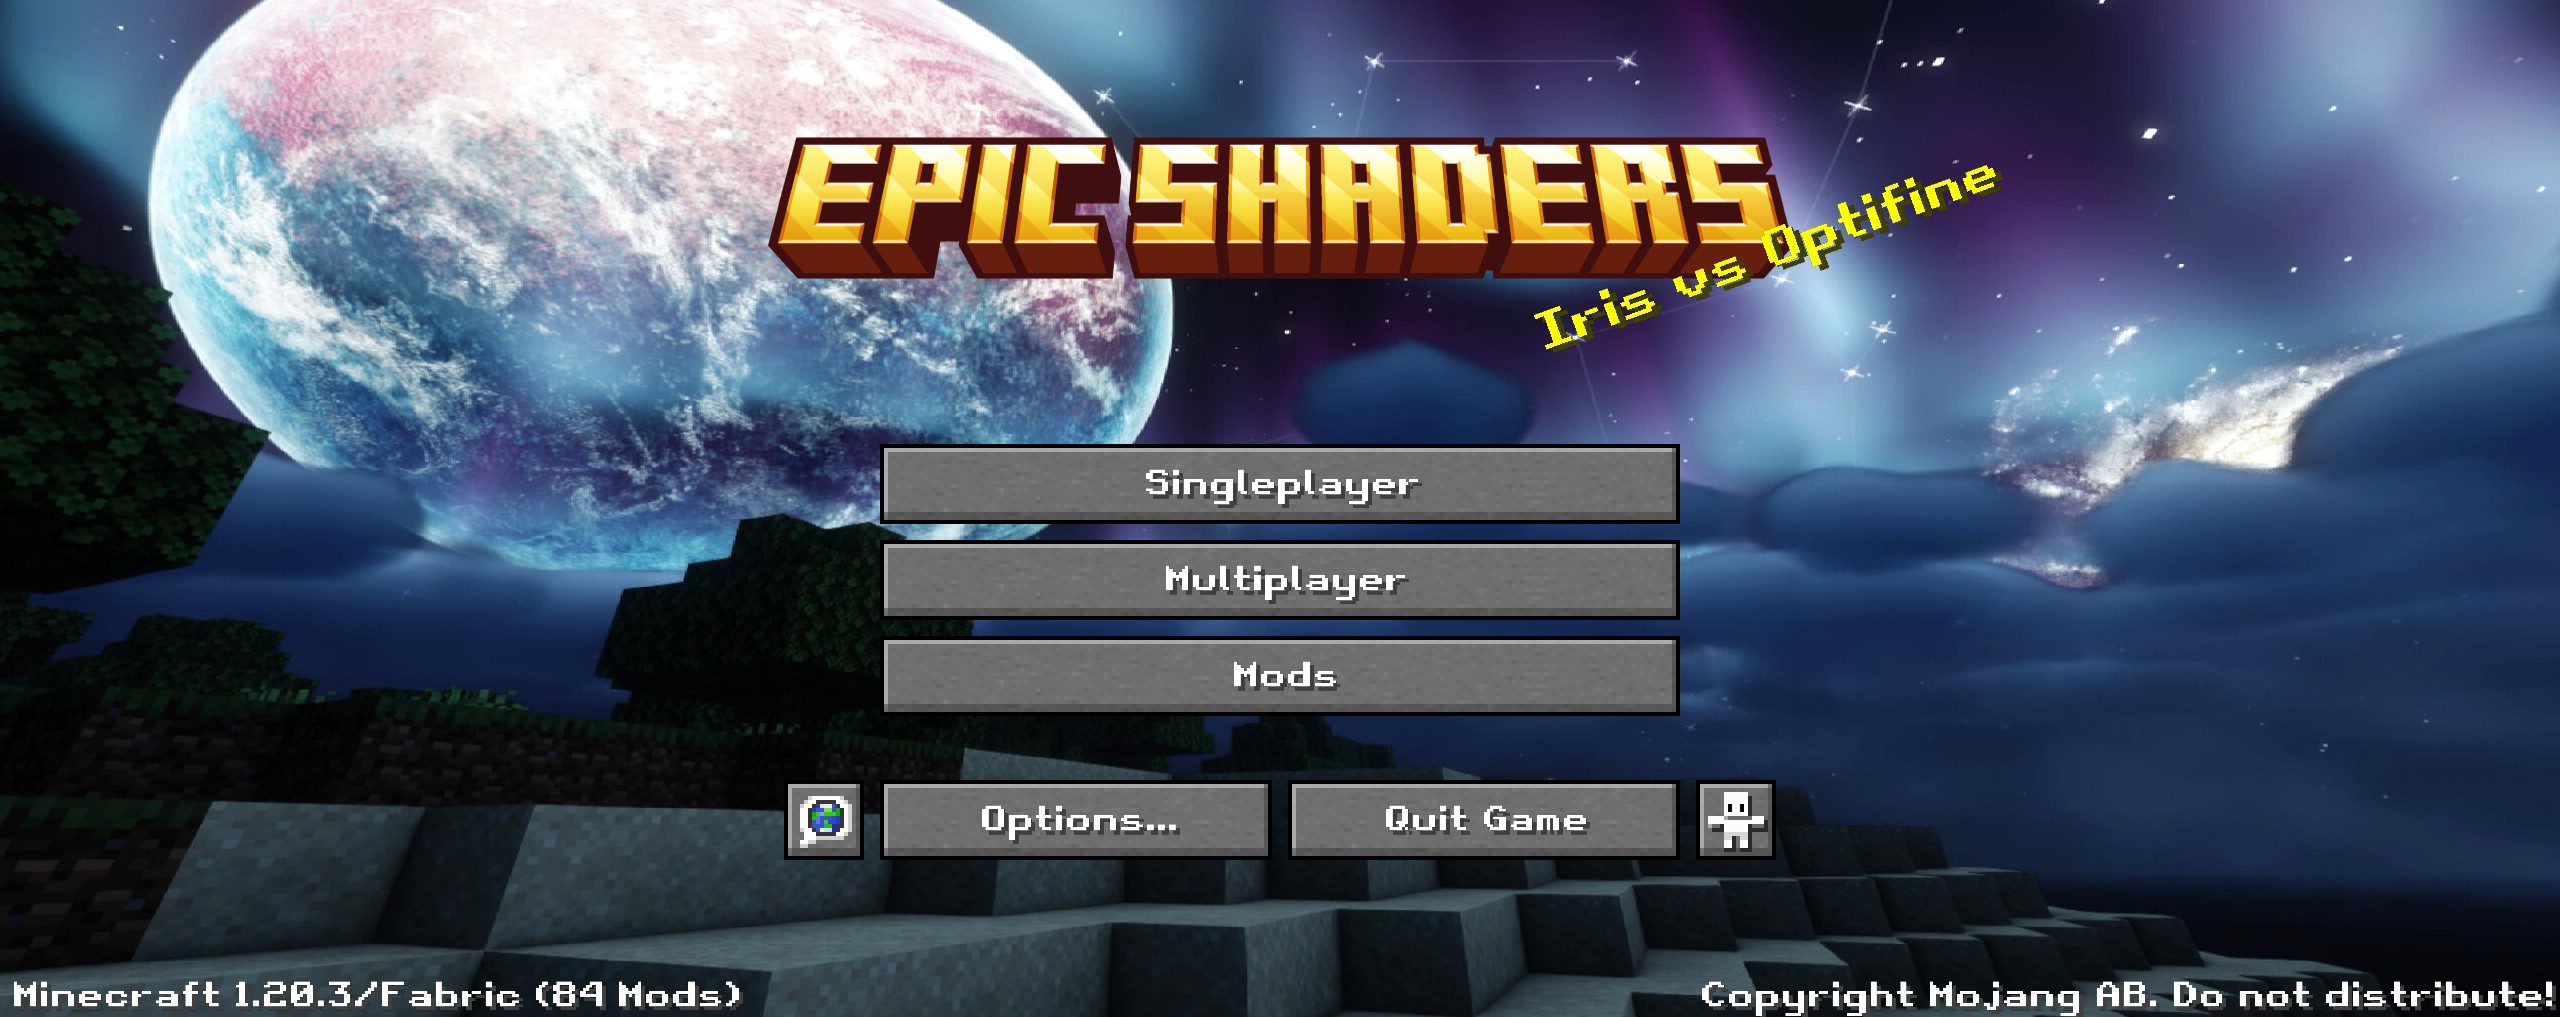 Epic Shaders Modpack (1.21, 1.20.6) - Amazing Beauty of Minecraft 2